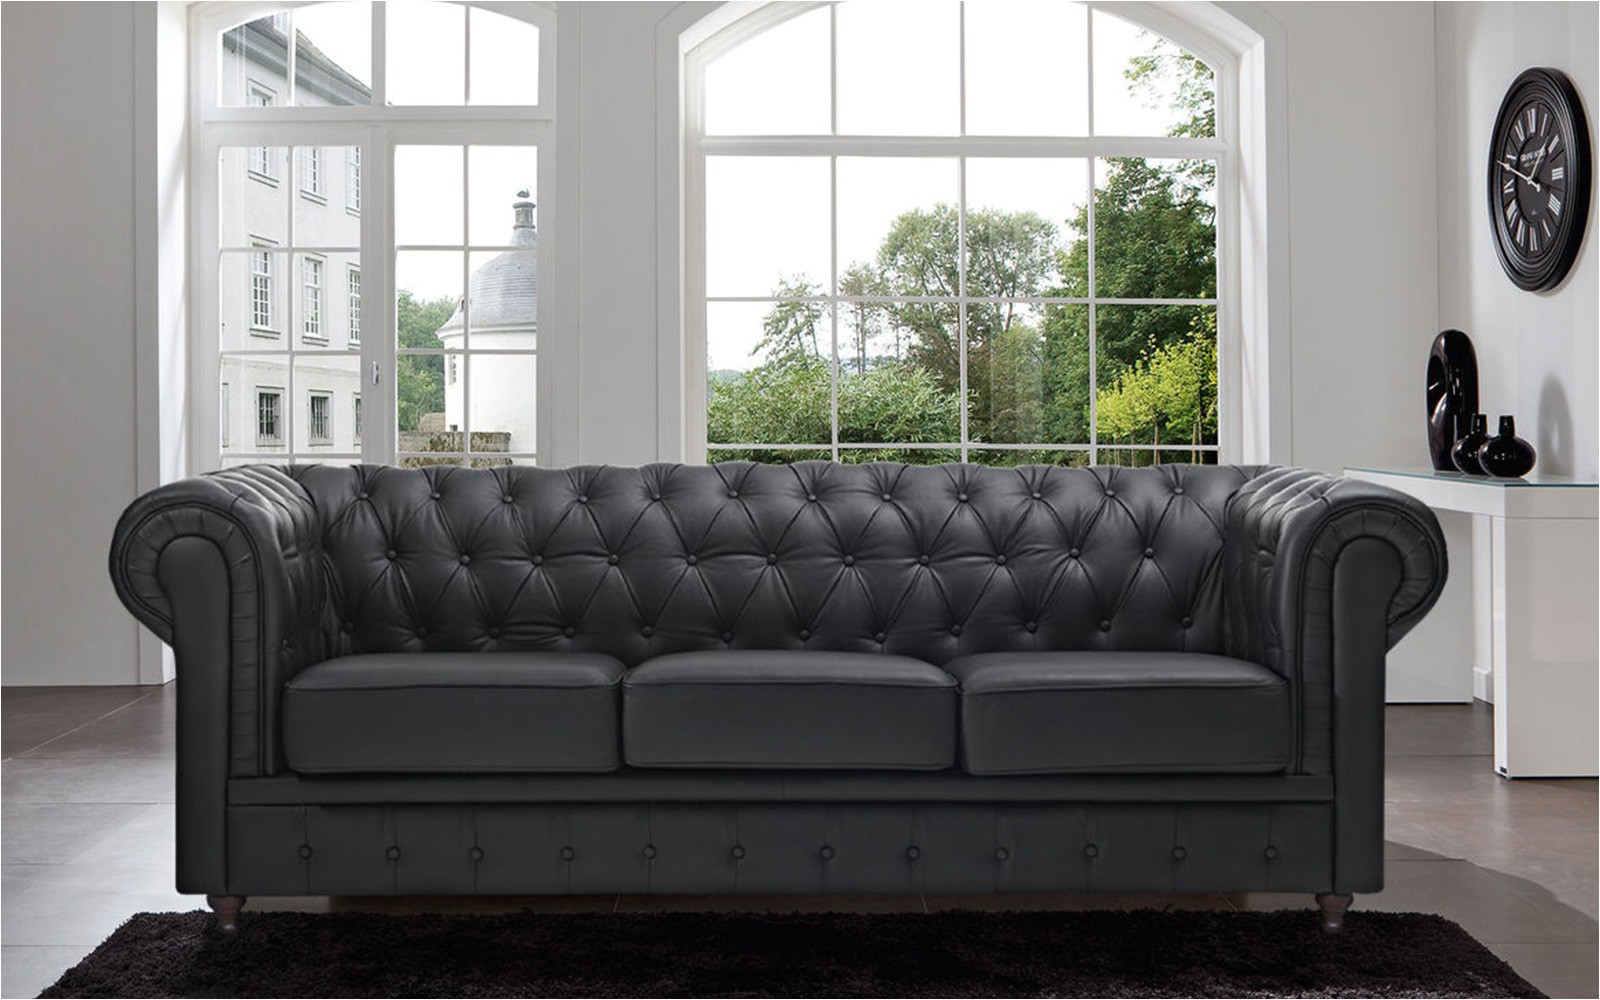 furniture black leather tufted sofa modern the holland how to find perfect 27 from black